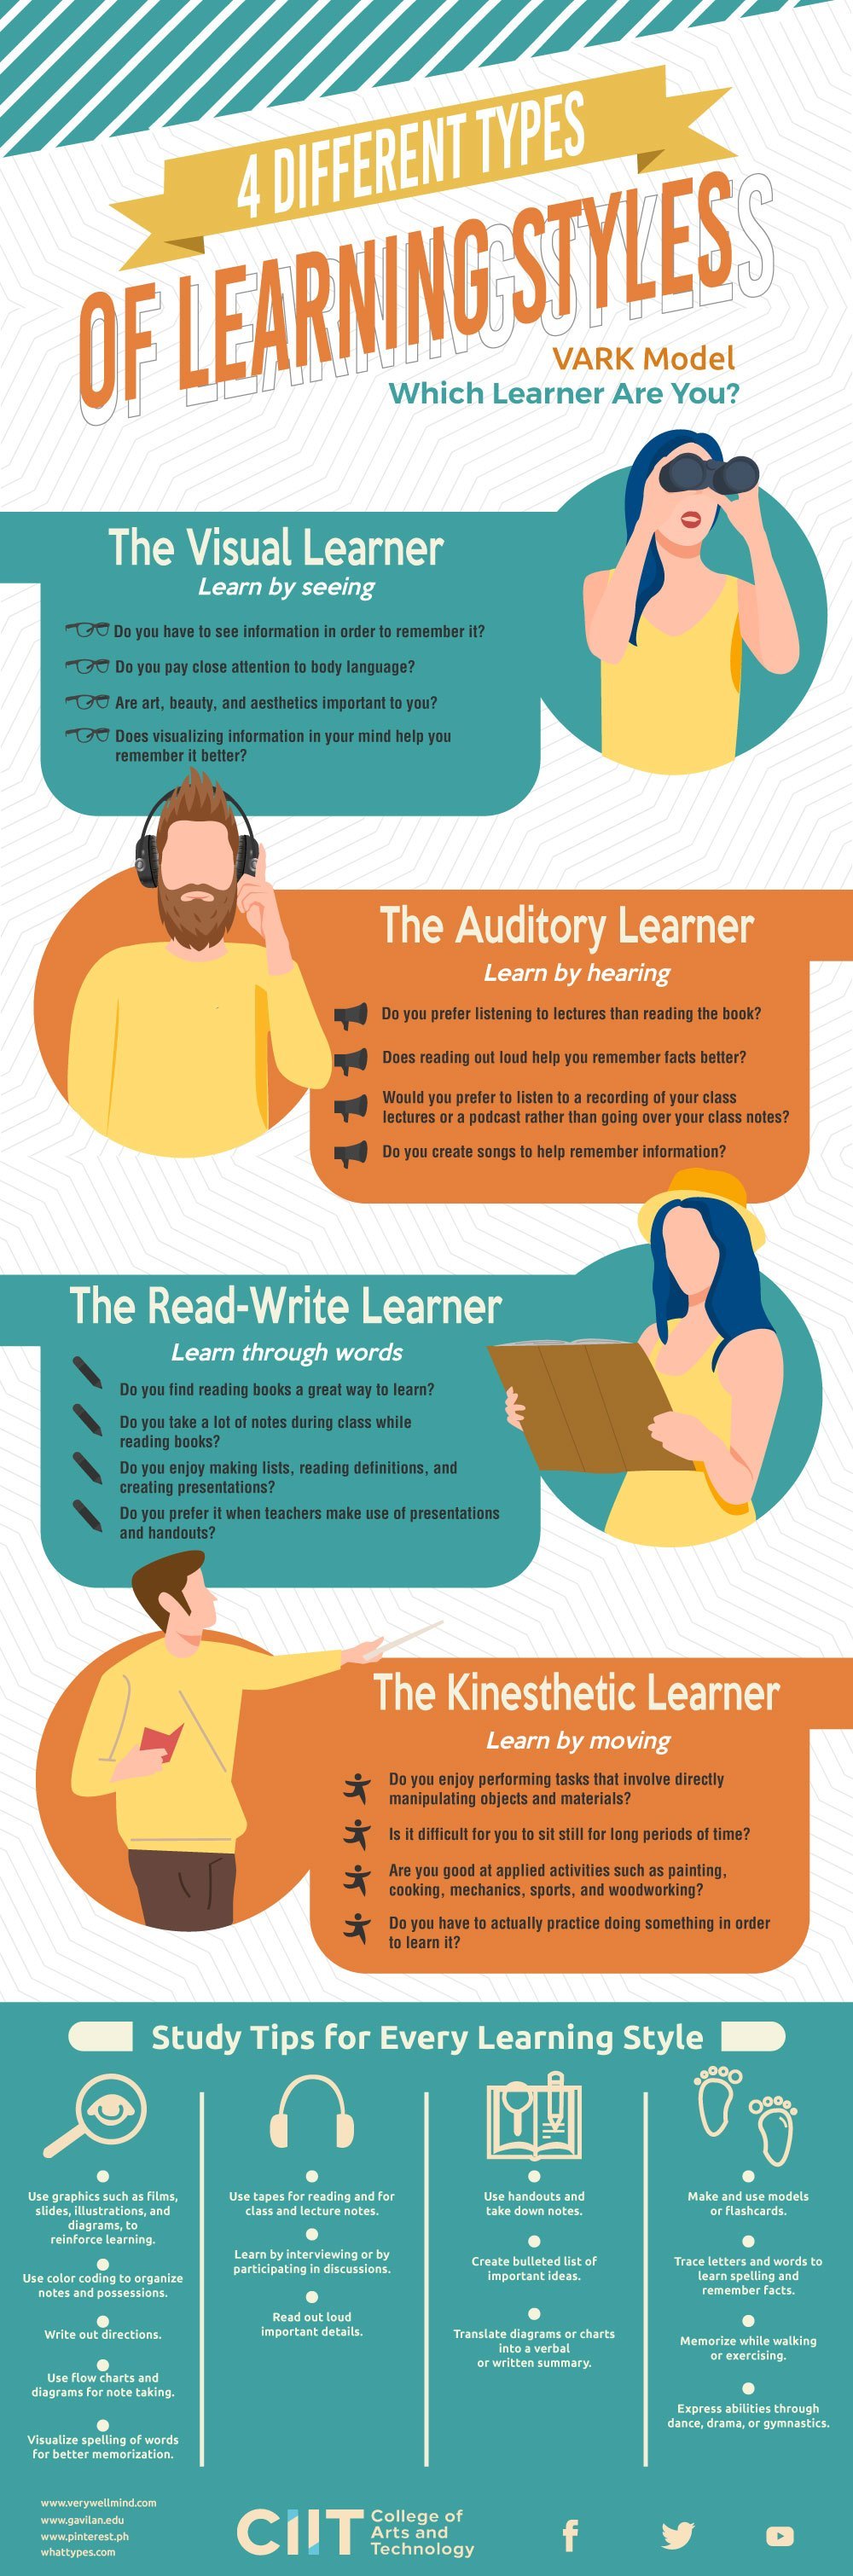 4 Different Types of Learning Styles